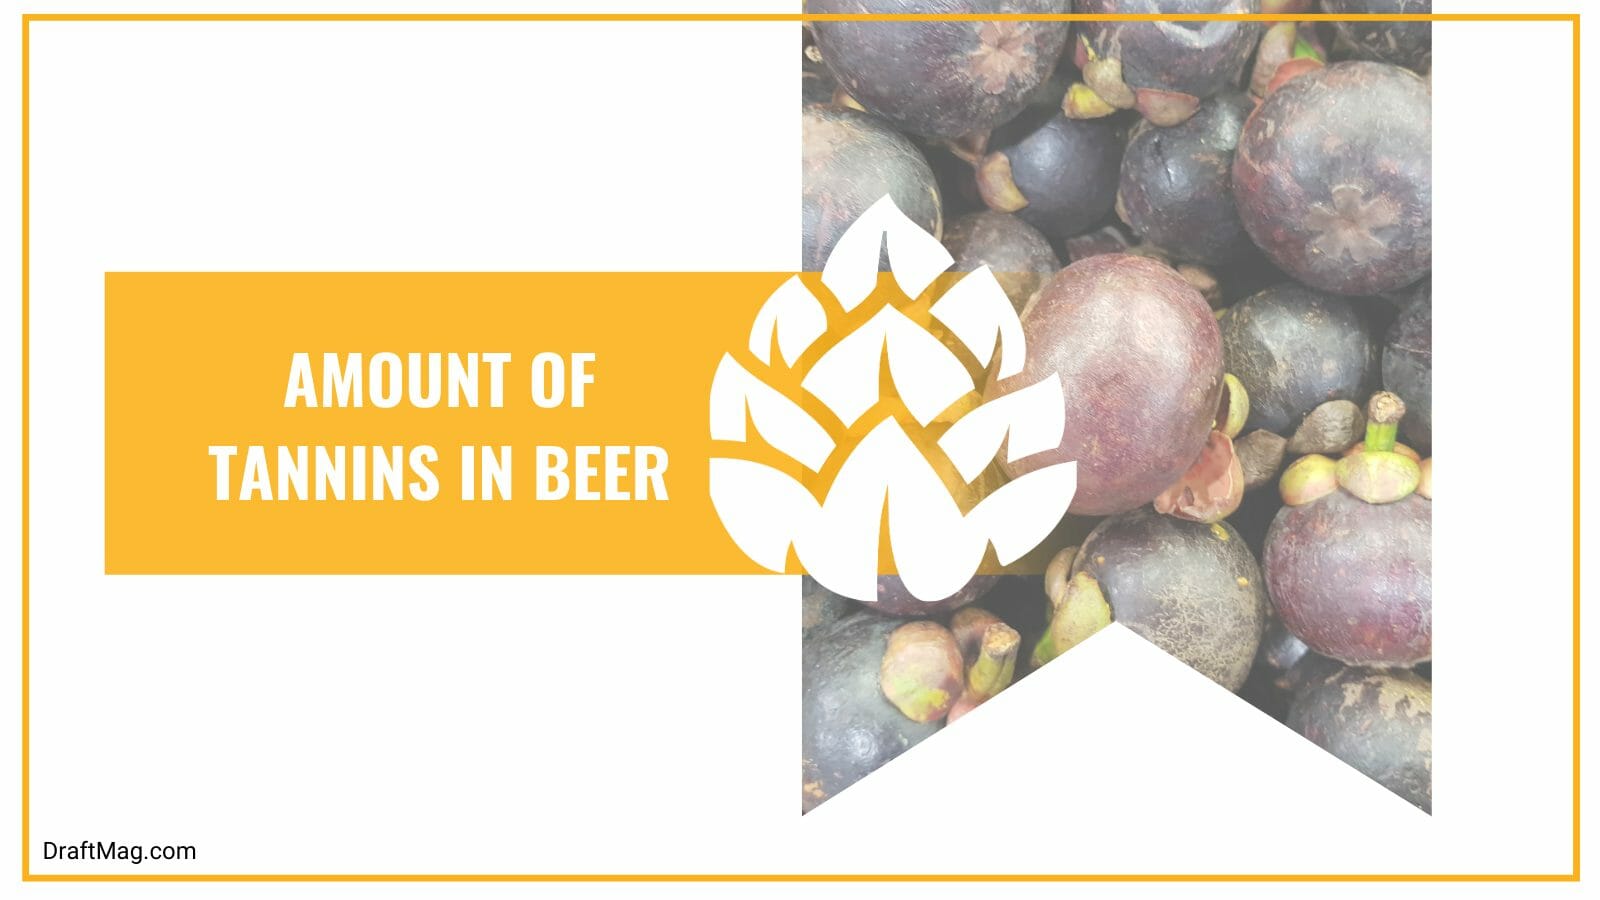 Quantity of Tannins in Beer